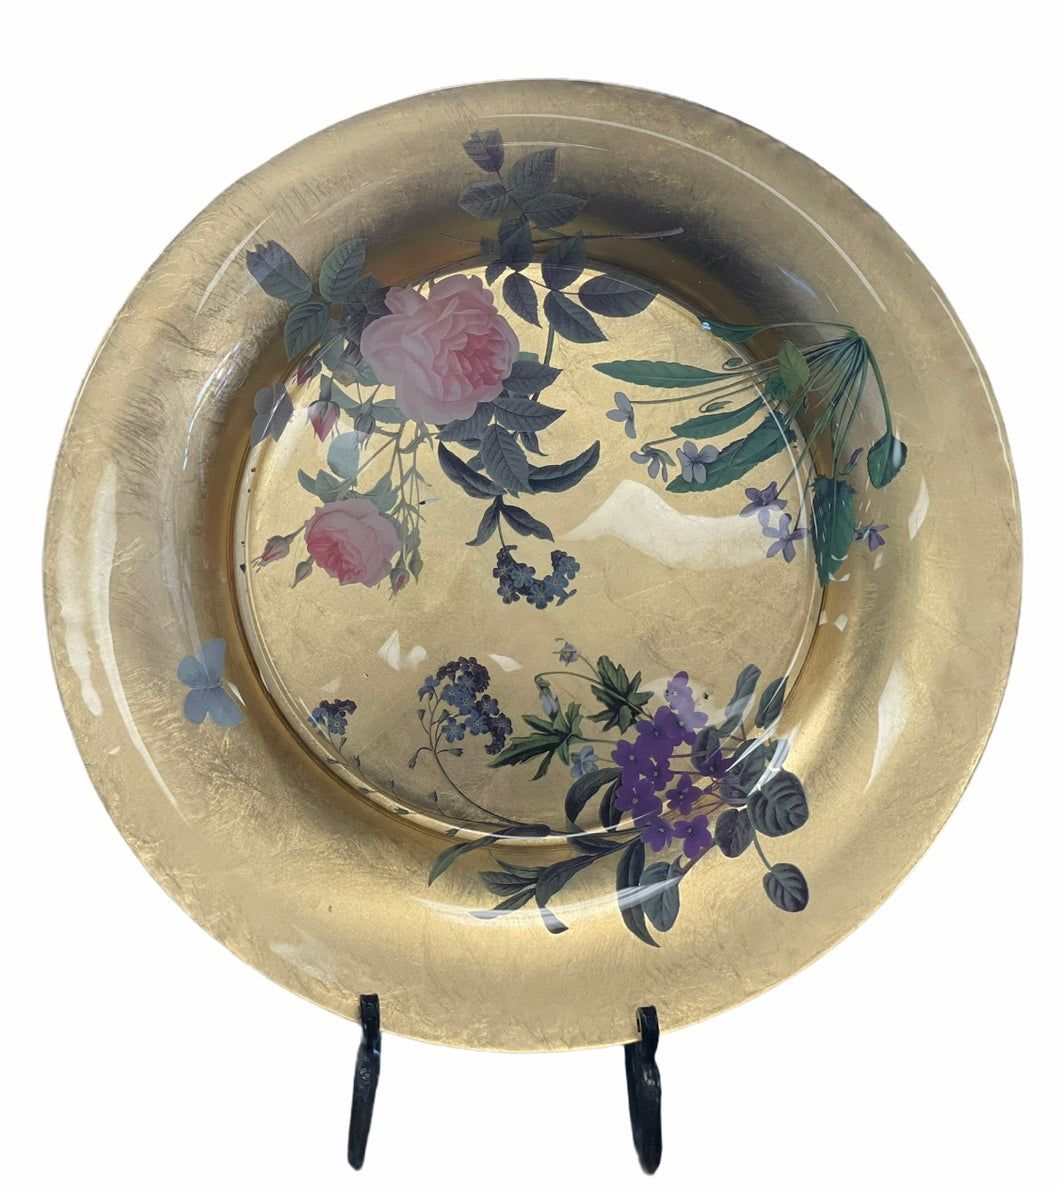 Gold plate with flowers